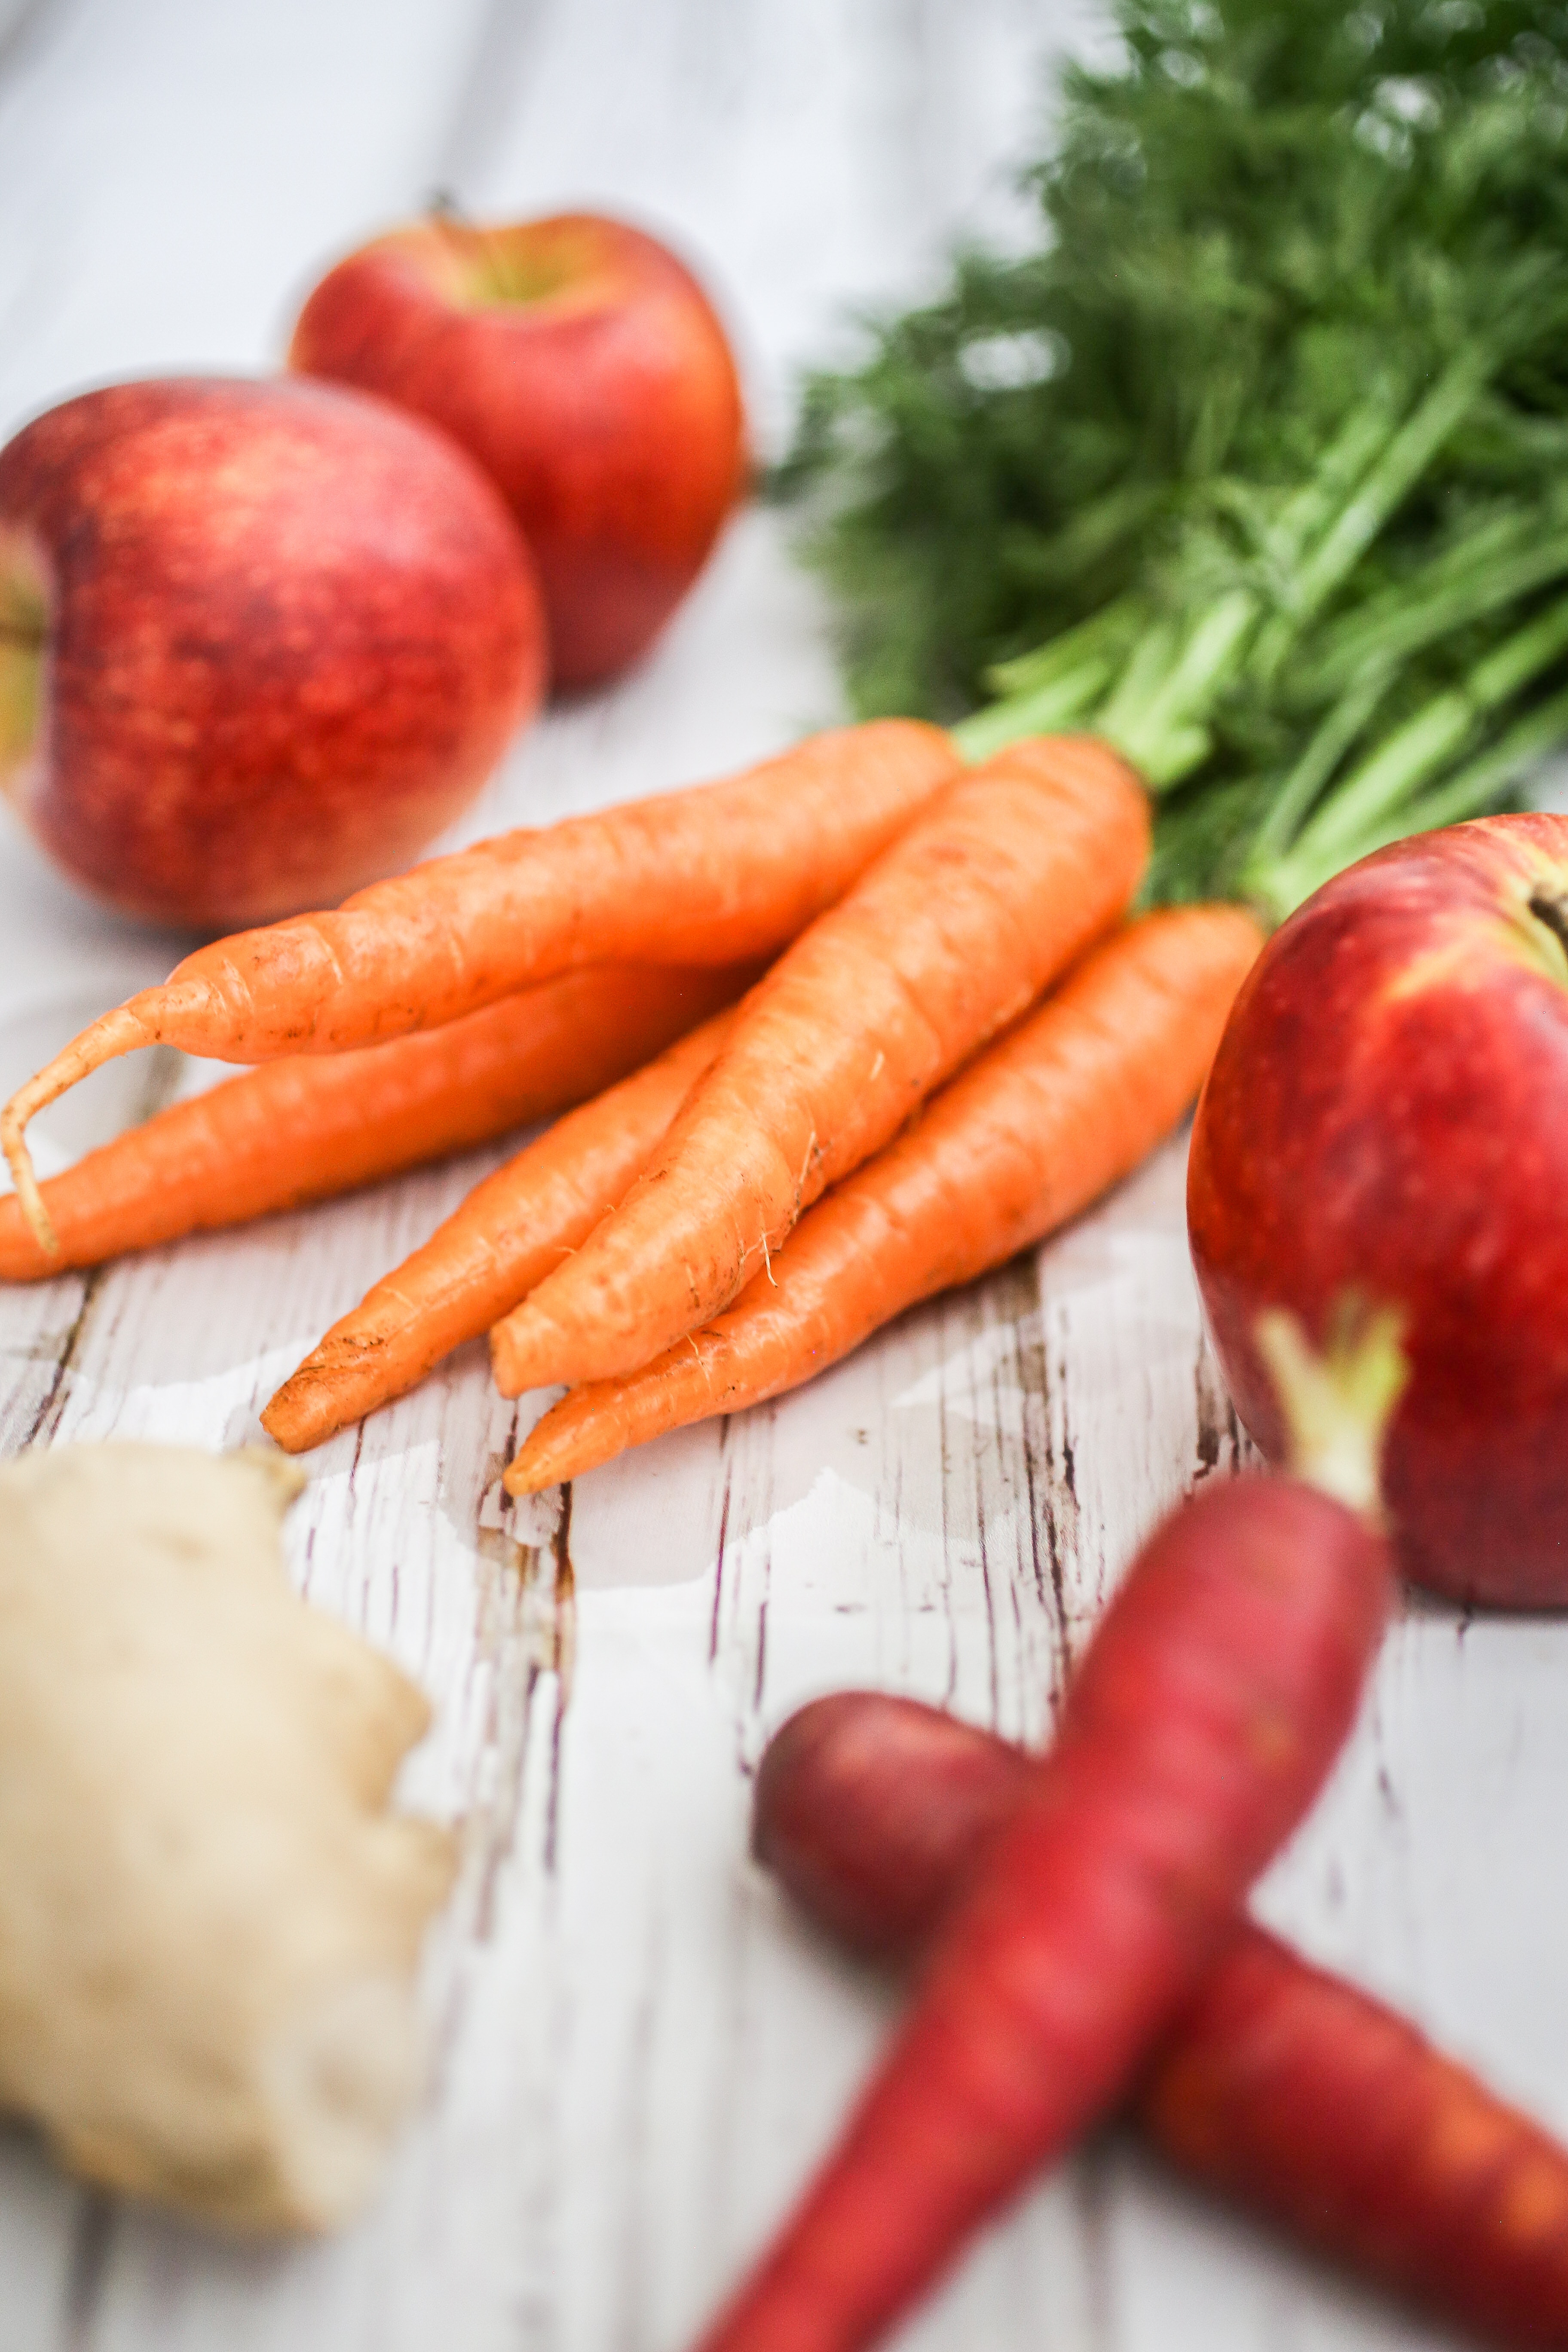 January Fruit and Vegetable Guide for Wholesale Distributors